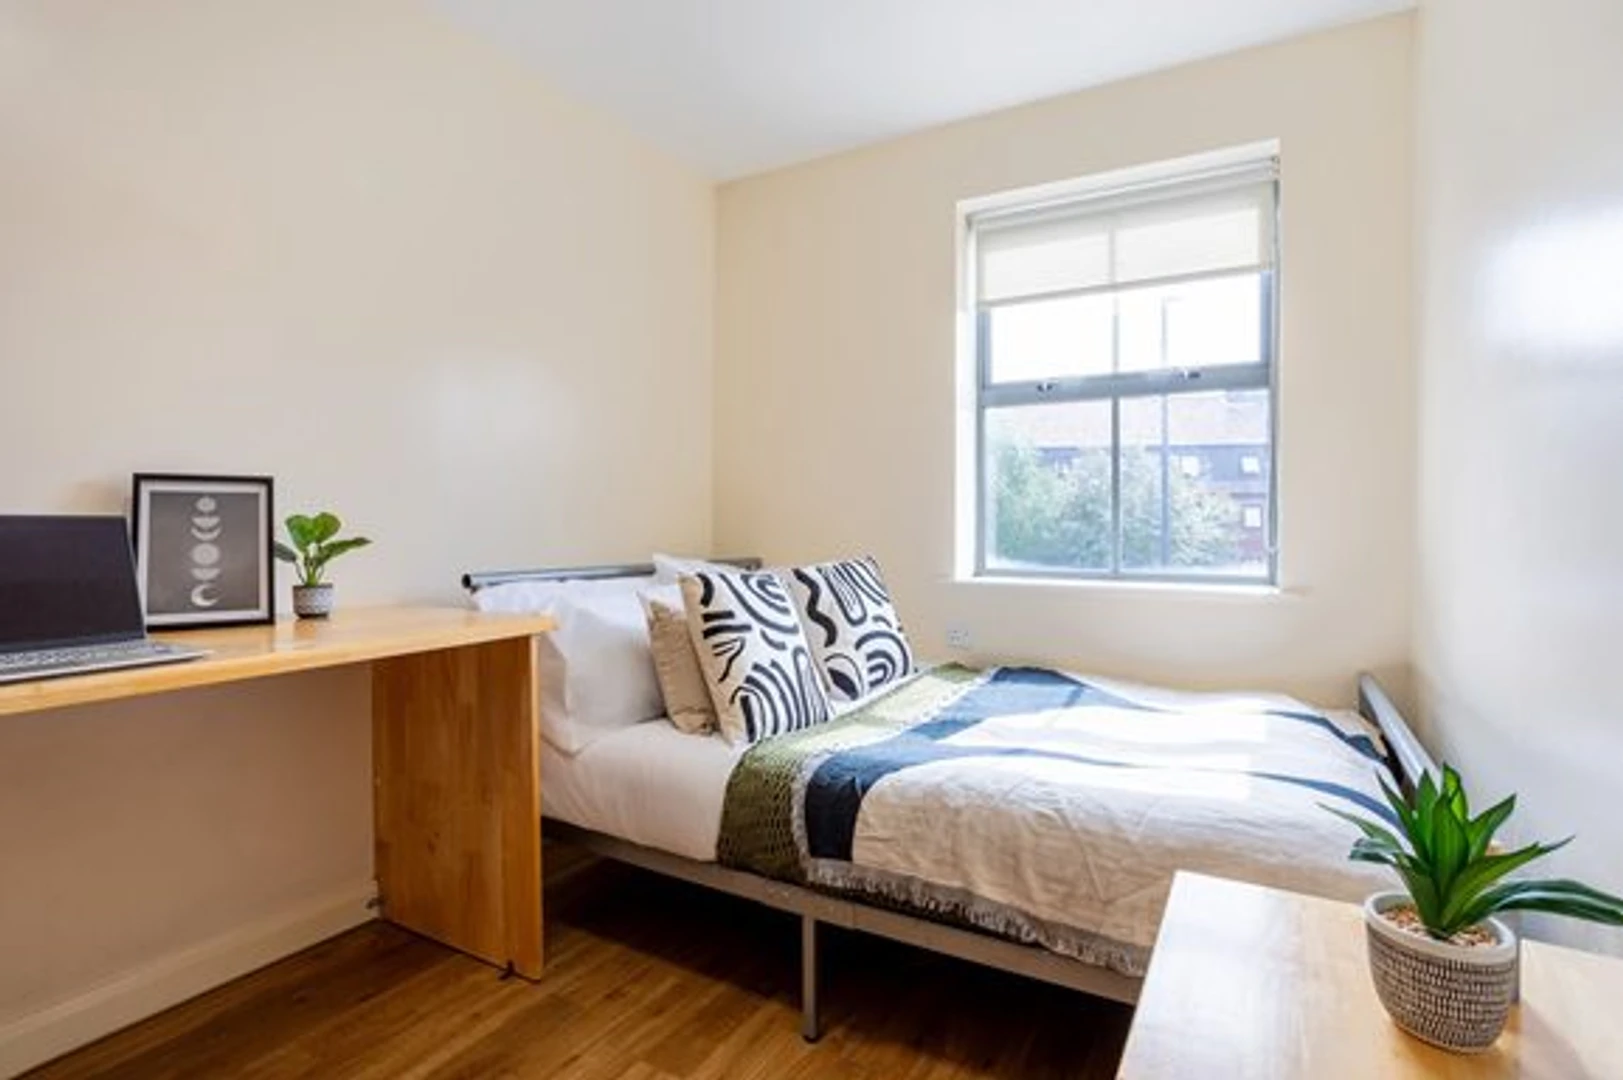 Renting rooms by the month in Bristol